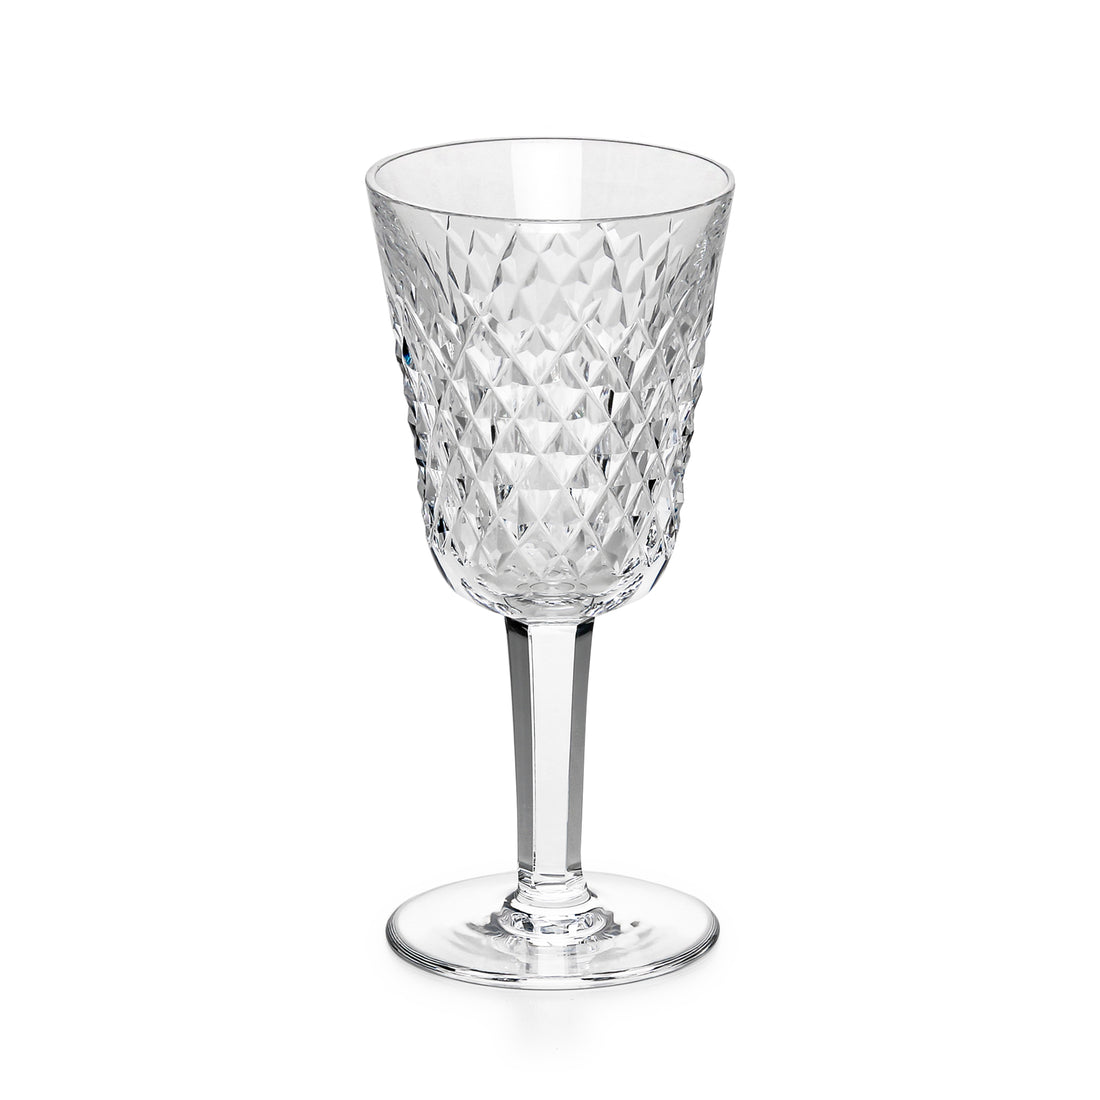 WATERFORD Alana Wine Glasses - Set of 8